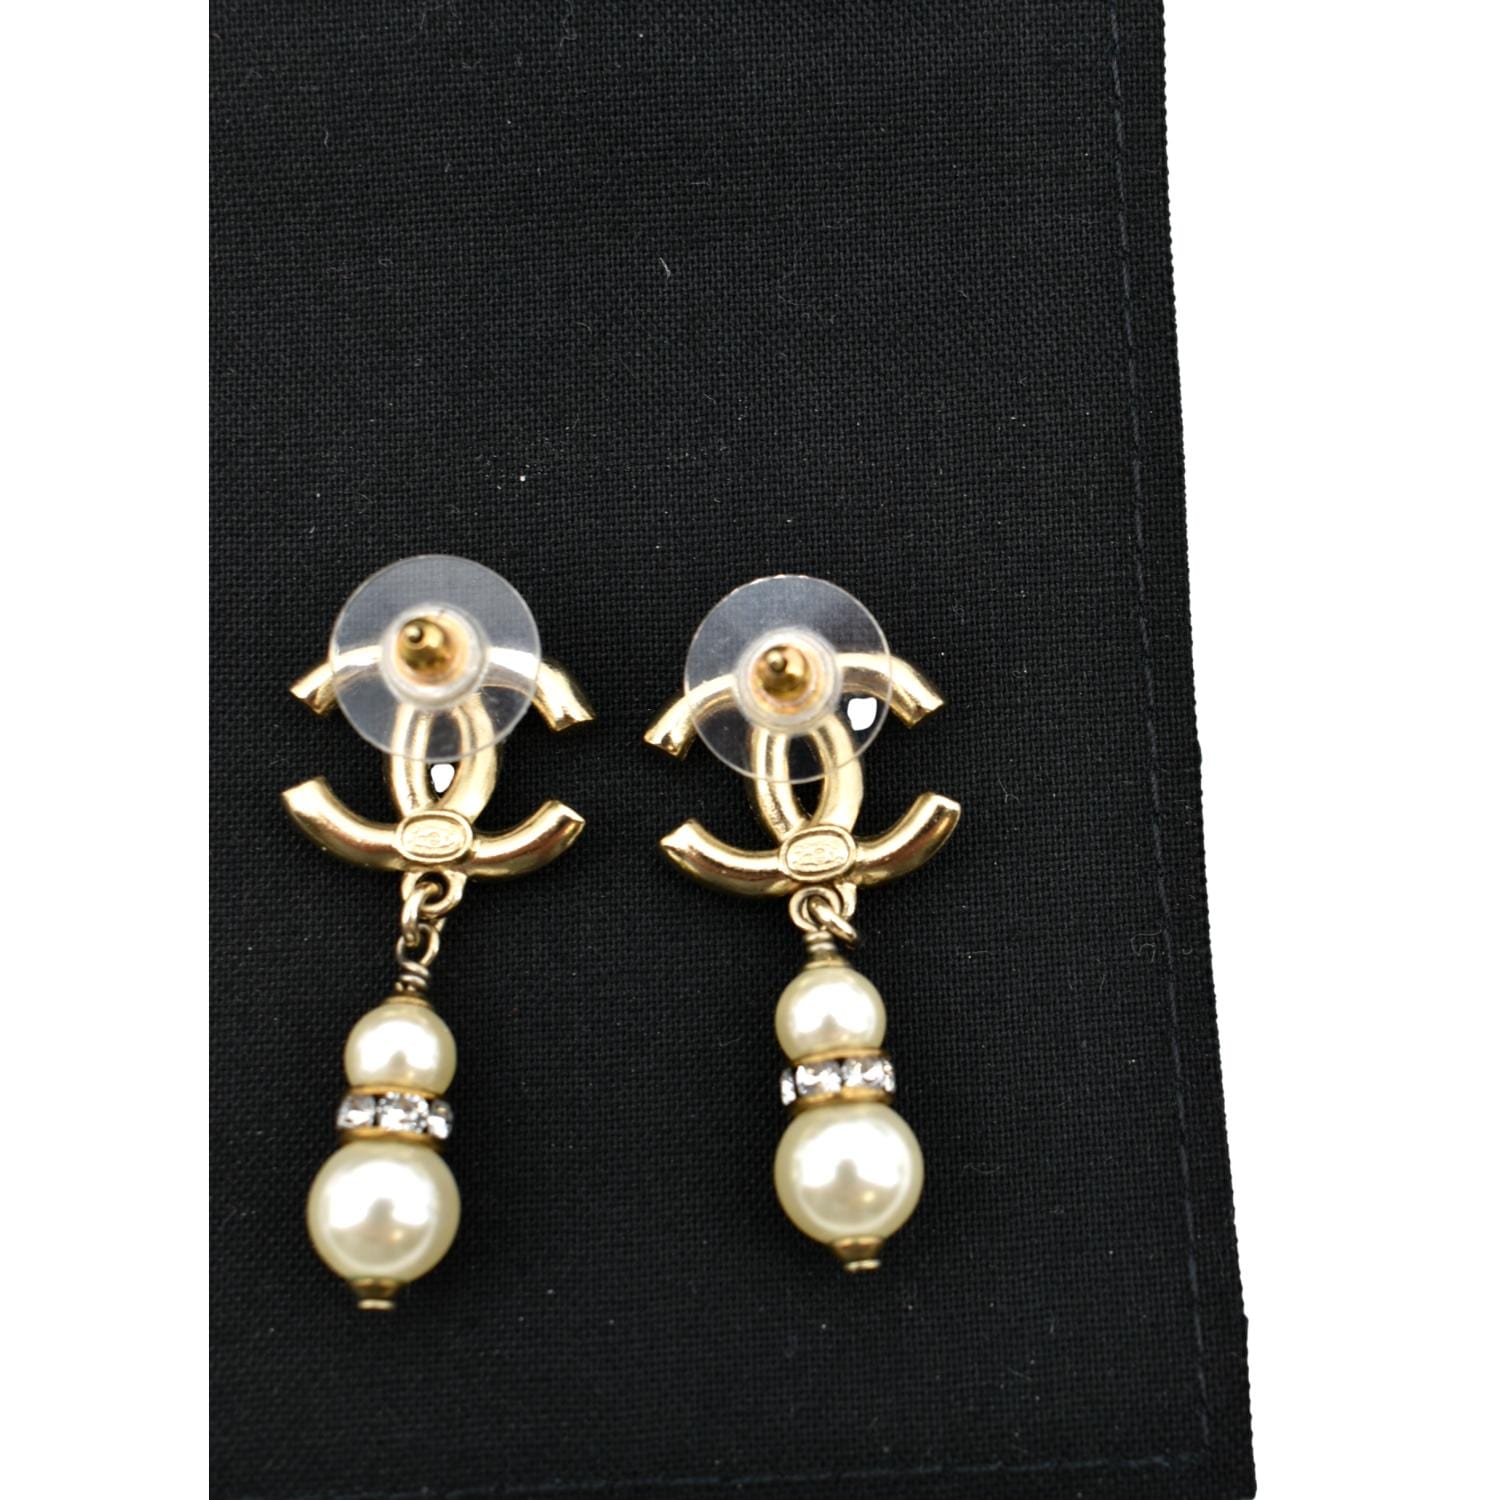 Vintage CHANEL earrings with golden CC, faux pearl, black leather